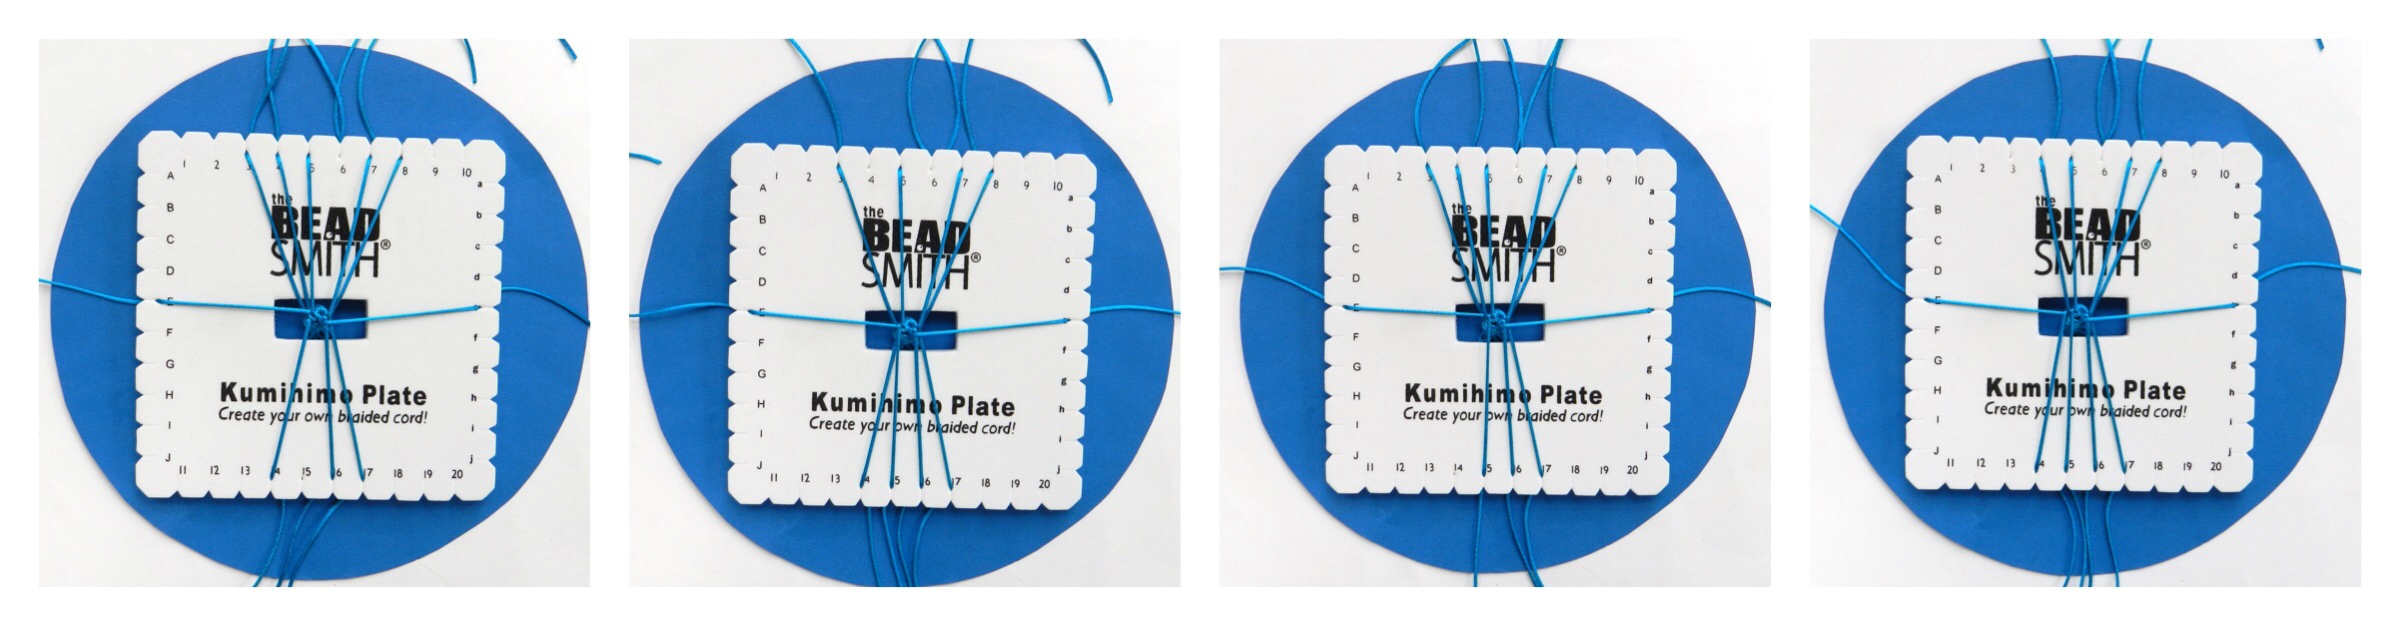 Kumihimo Square Plate instructions